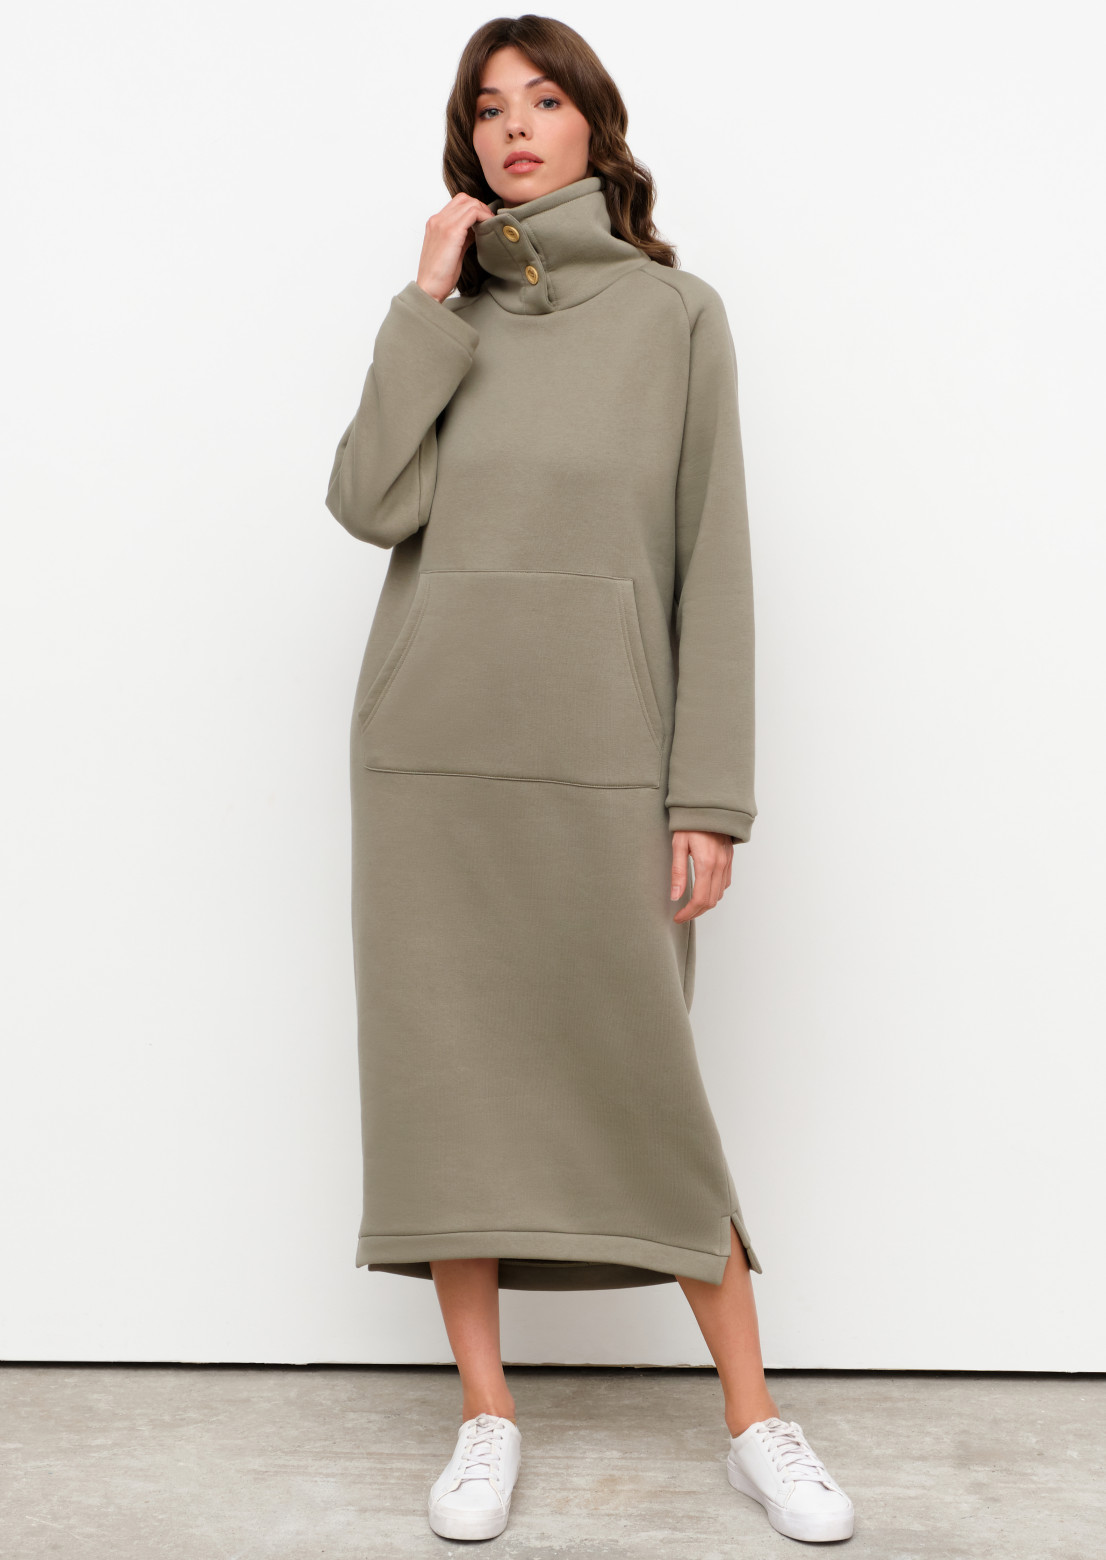 Khaki colour footer dress with buttons and with pocket